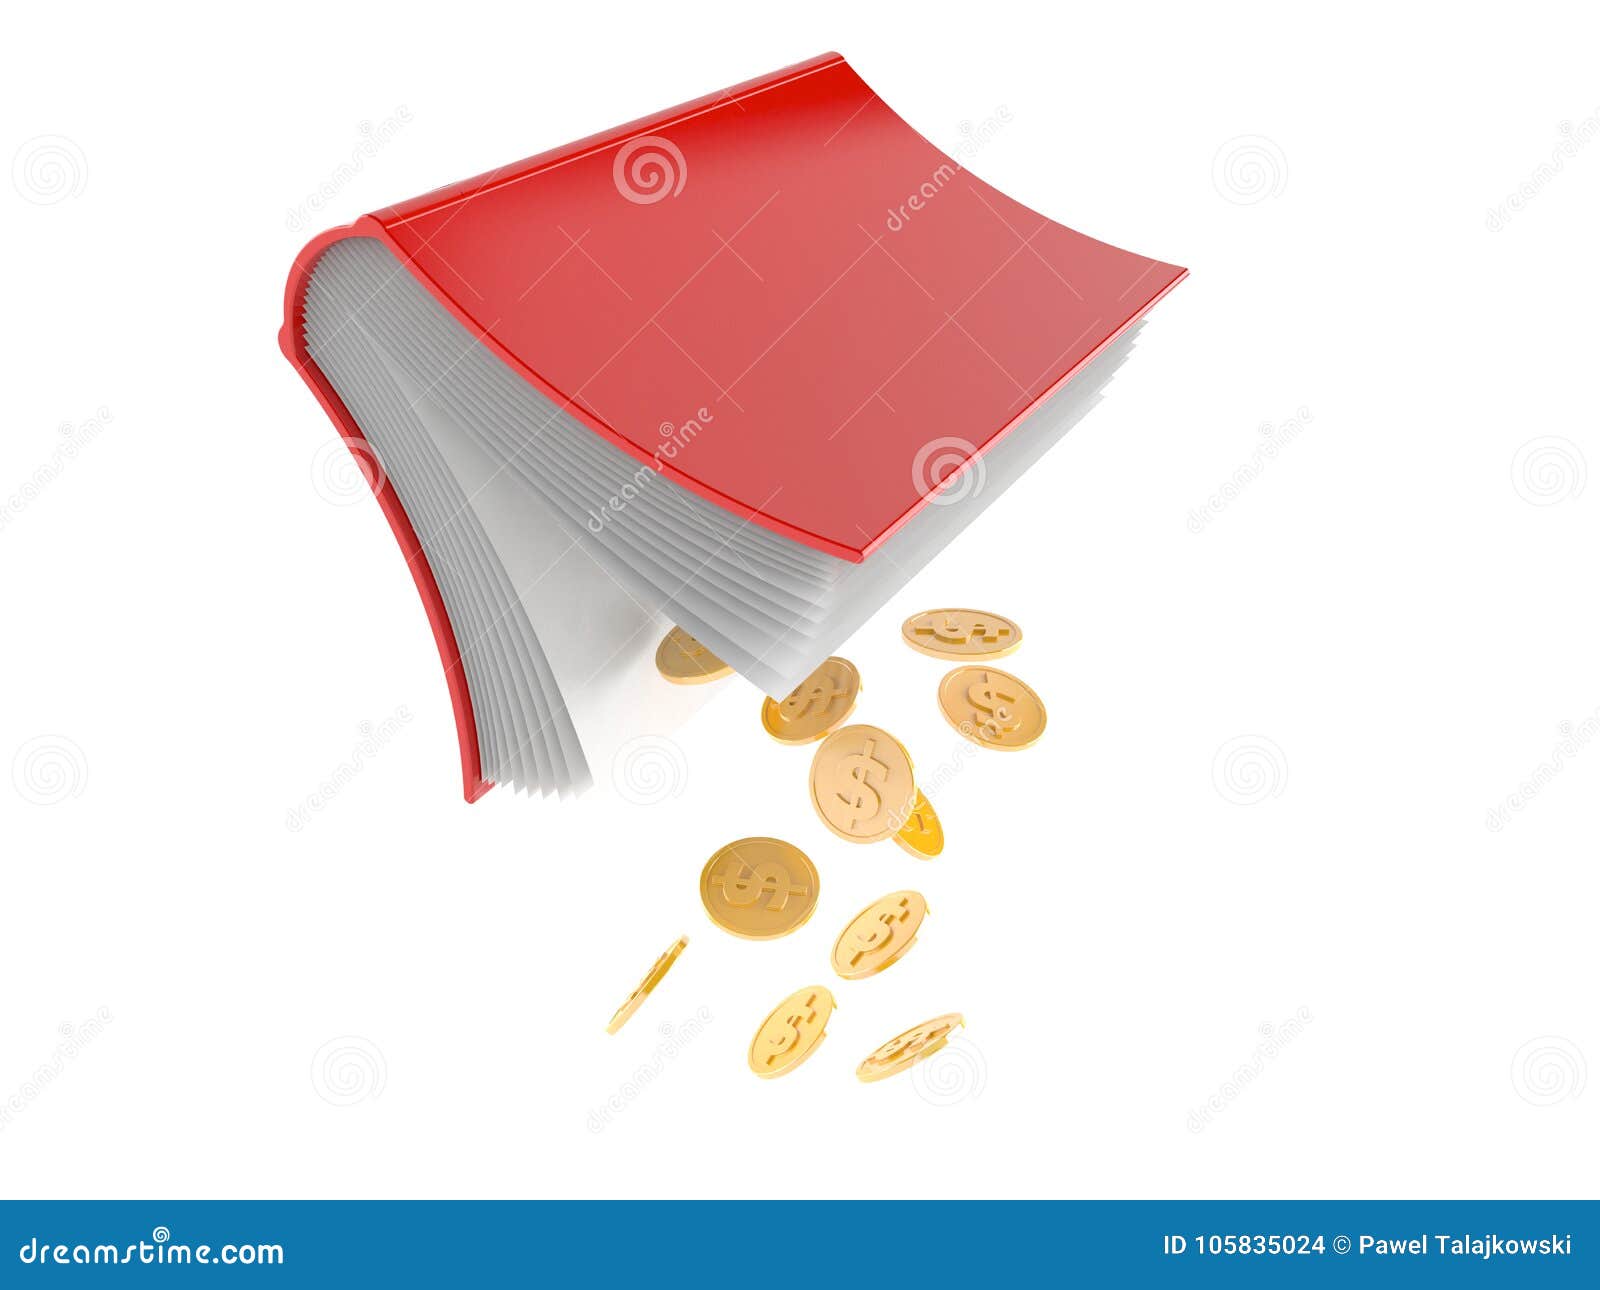 Books with coins isolated on white background